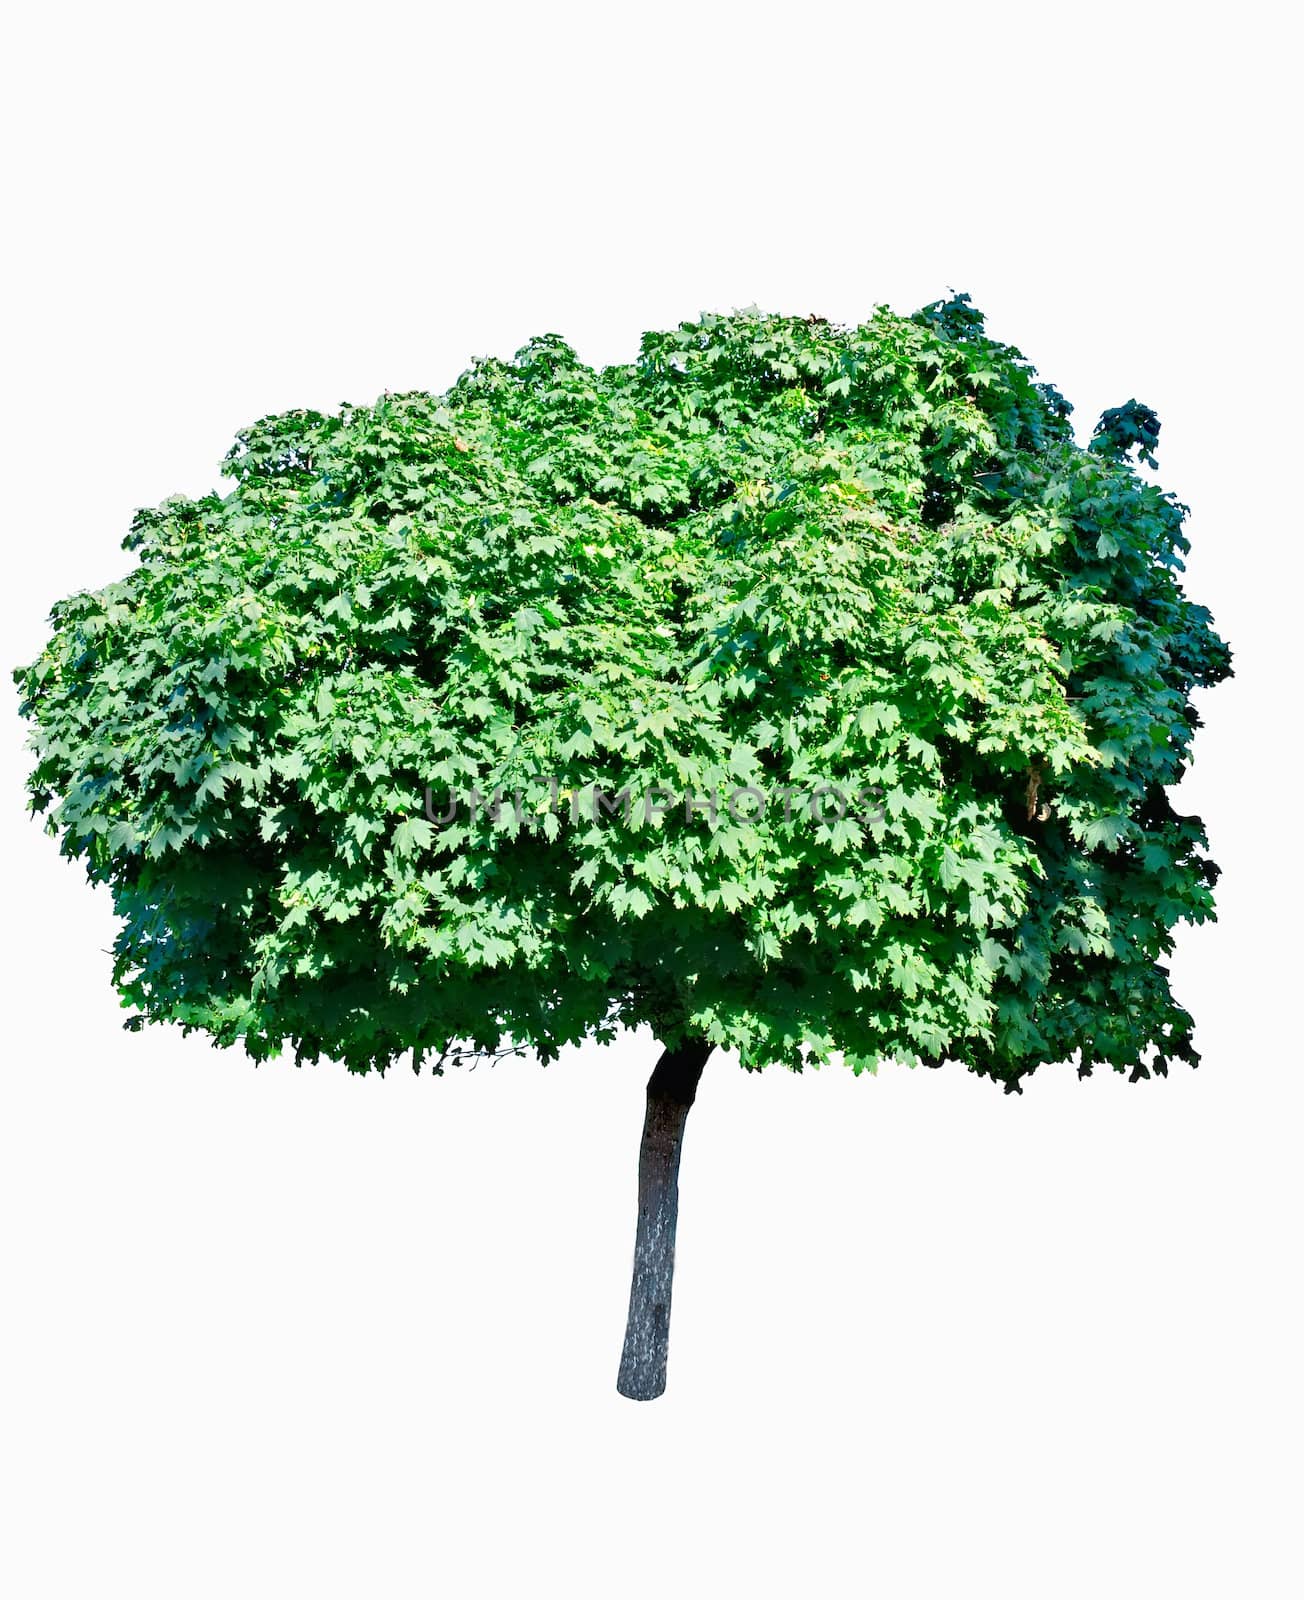 Young well-groomed maple, with the magnificent greens, isolated on a white background.